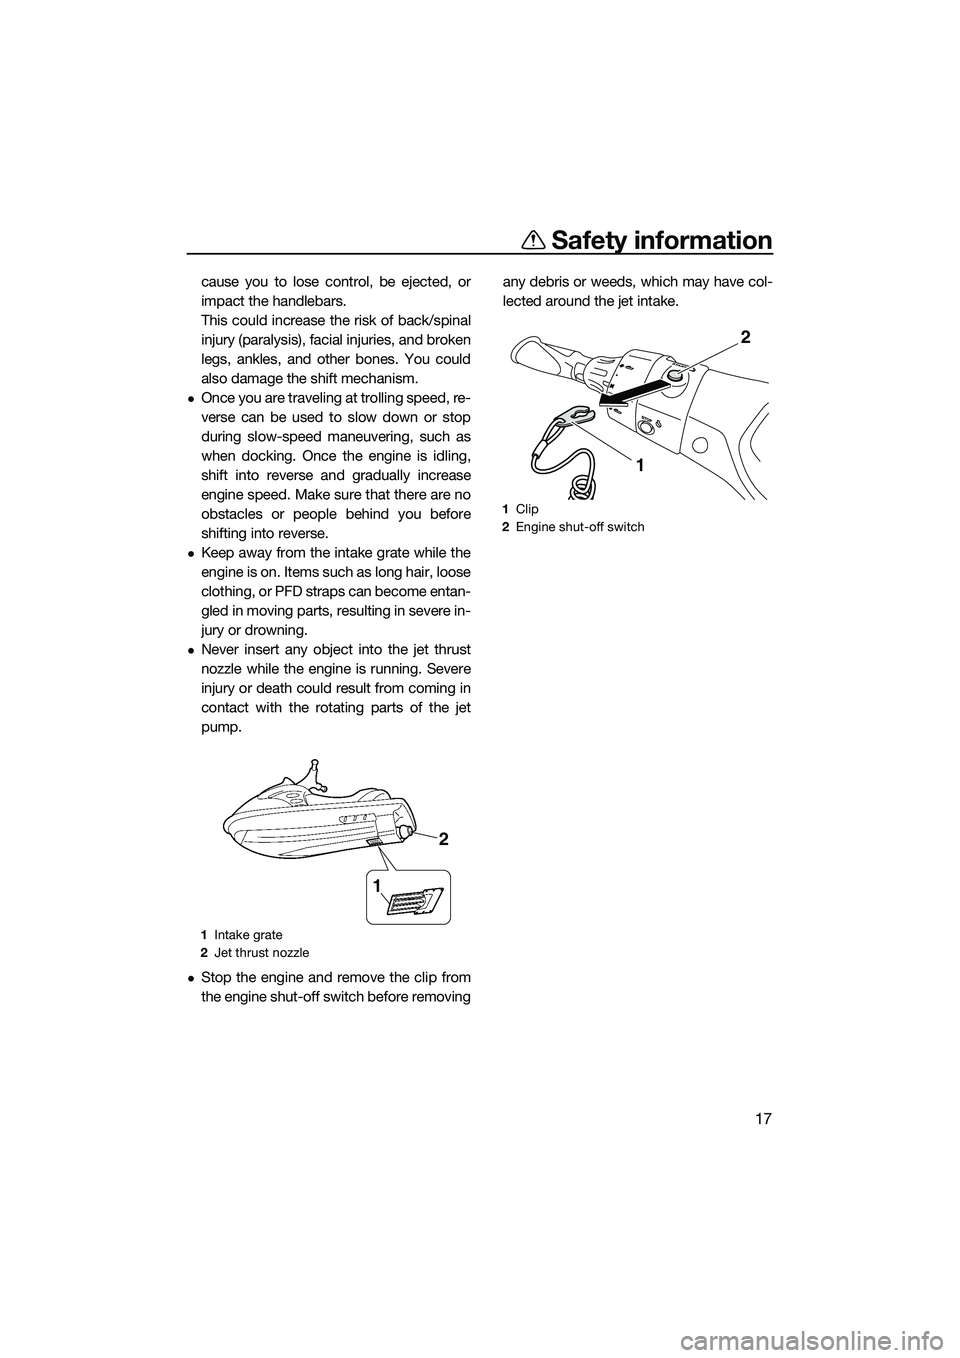 YAMAHA FX SVHO 2014  Owners Manual Safety information
17
cause you to lose control, be ejected, or
impact the handlebars.
This could increase the risk of back/spinal
injury (paralysis), facial injuries, and broken
legs, ankles, and oth